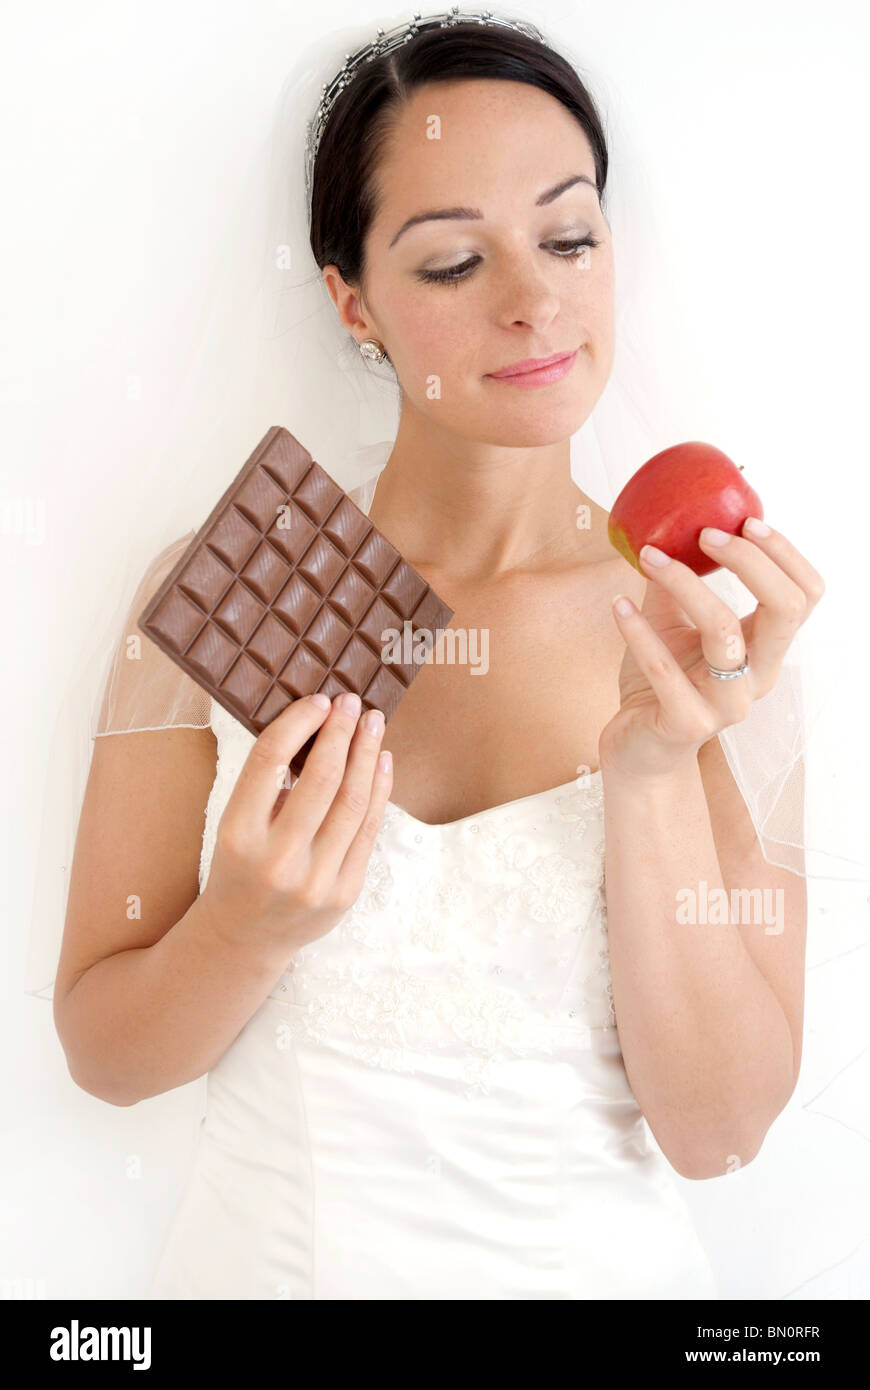 A bride to be who is tempted with good and bad food Stock Photo